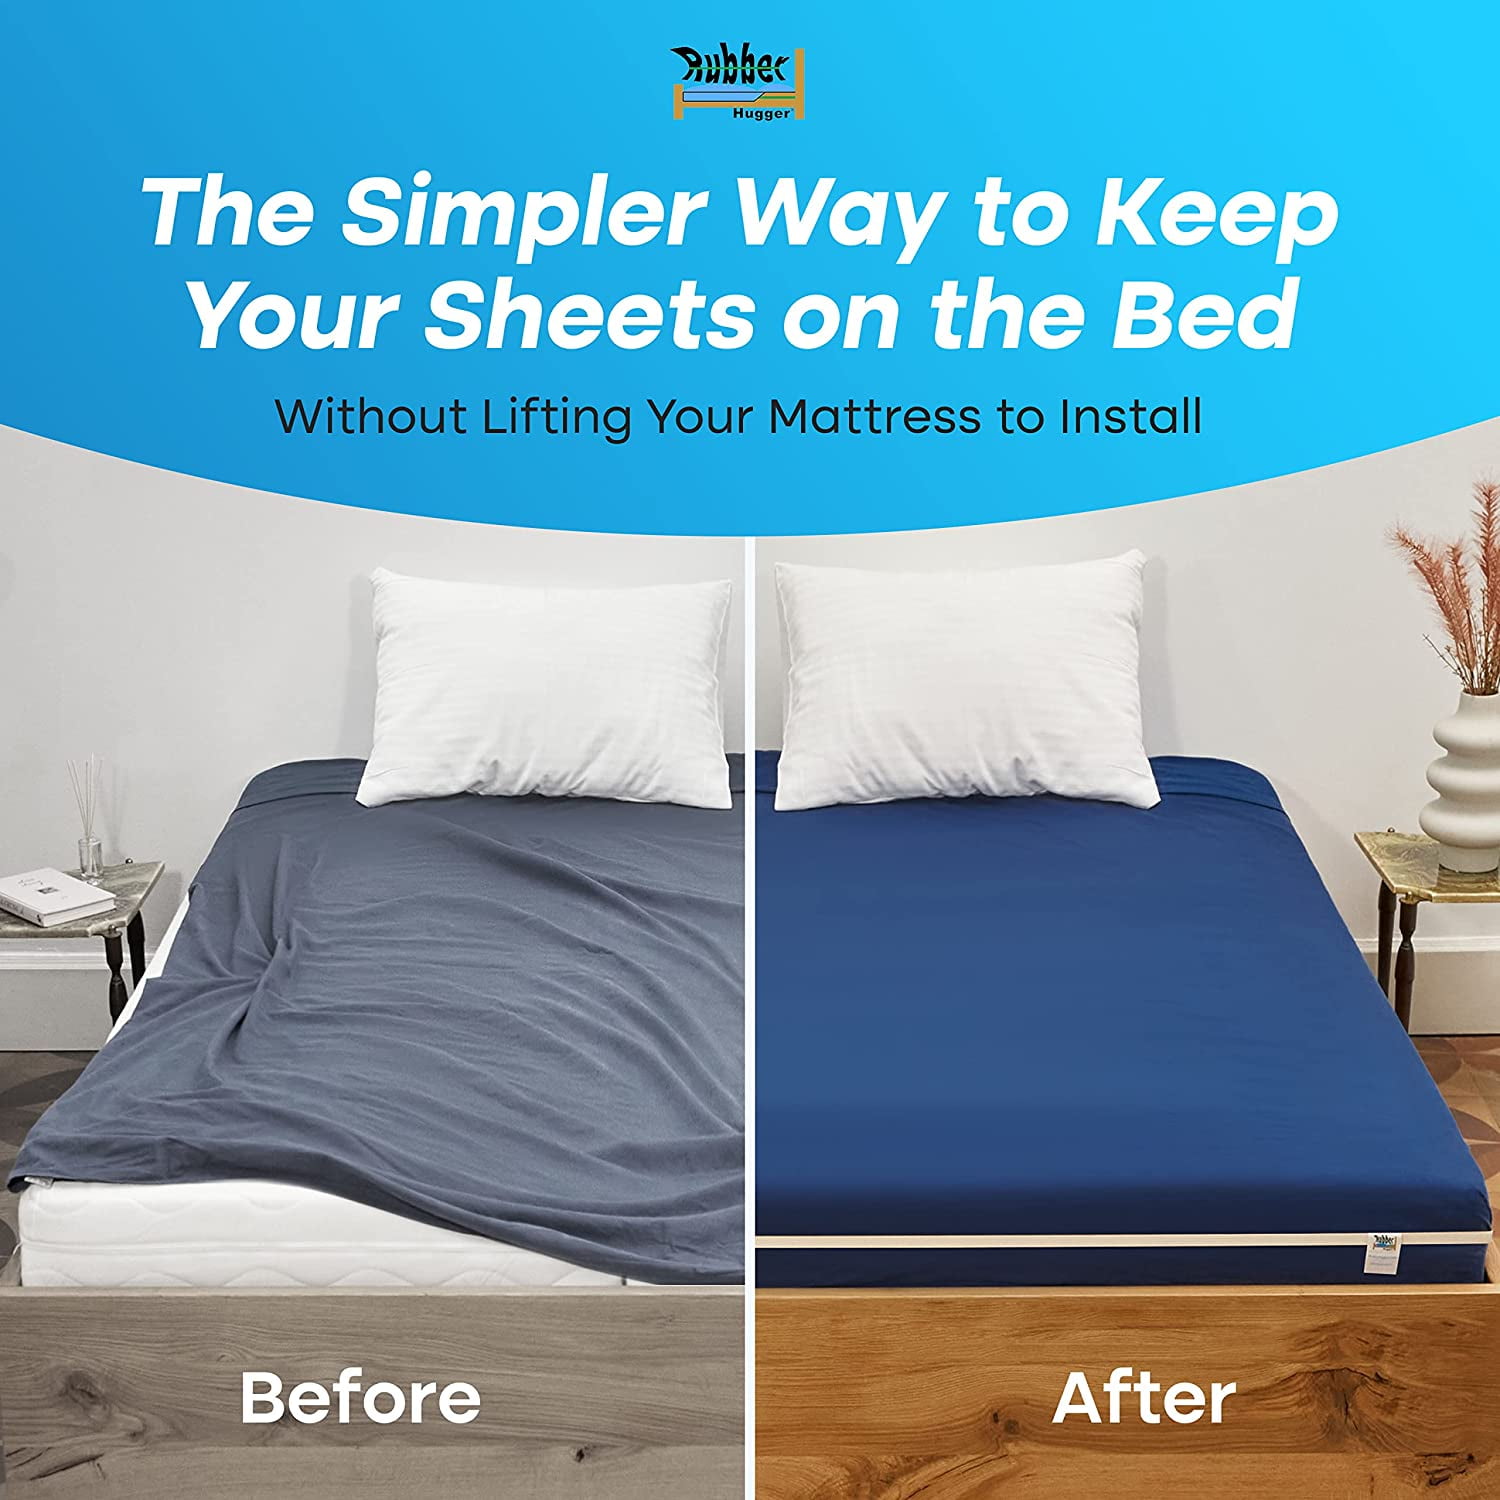 Samsung the rubber hugger - the bed sheet holder band - new approach for  keeping your sheets on your mattress - no sheet straps, sheet